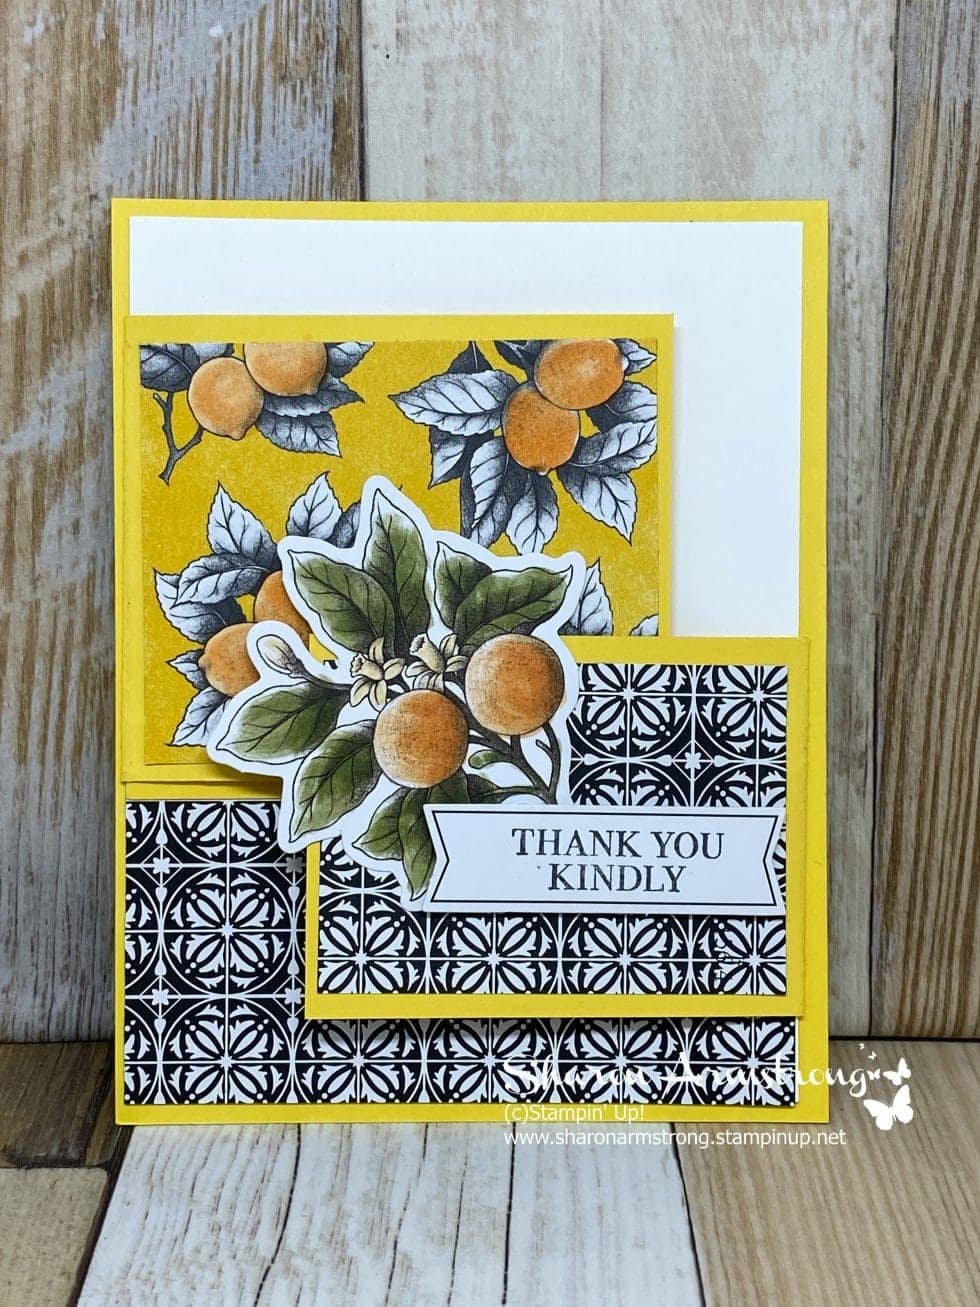 5 Lovely Cards to Get Your Creativity Flowing